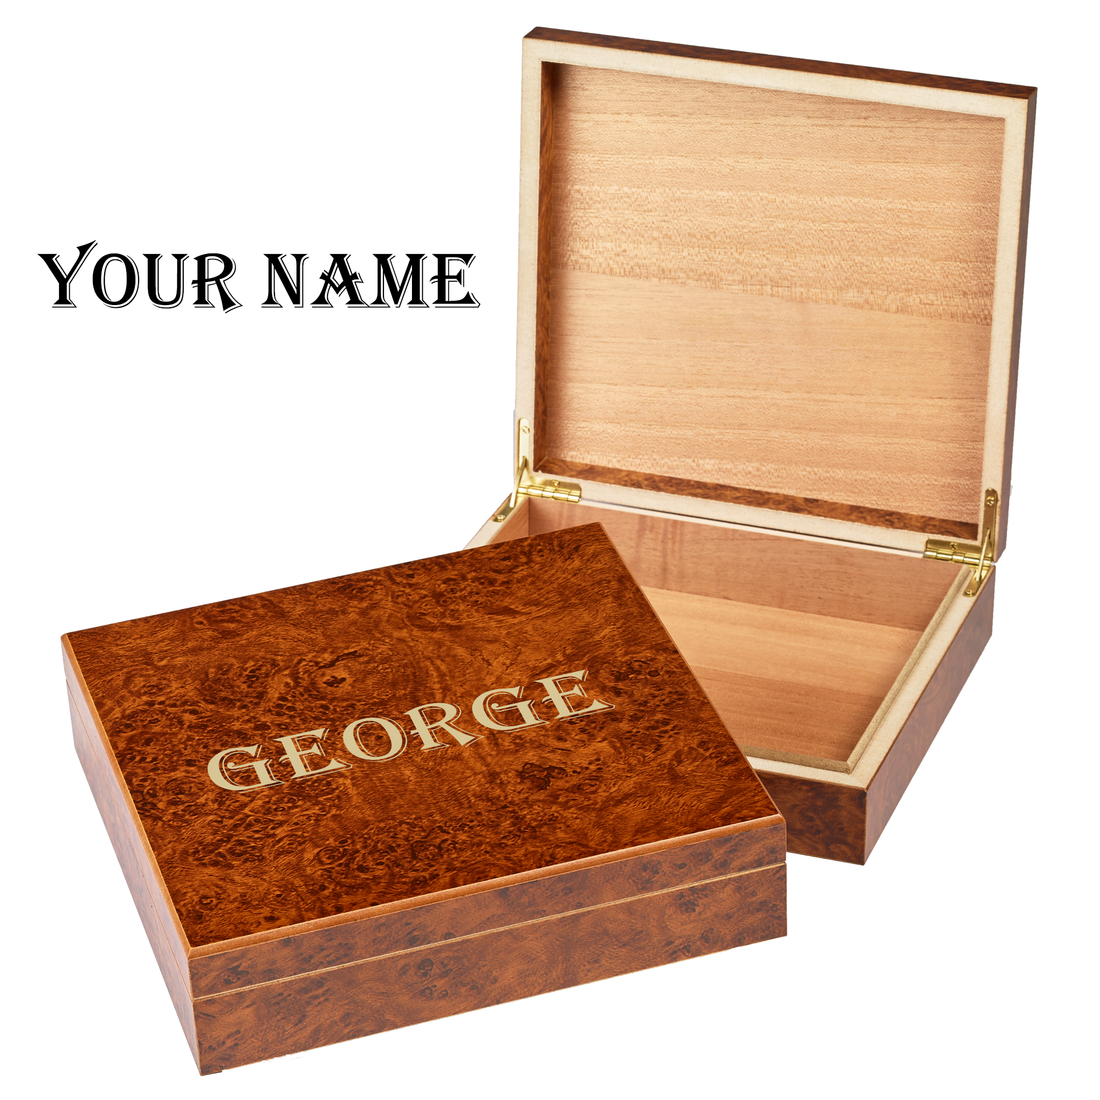 Thoughtful Groomsmen Gift Boxes: Show Appreciation on Your Big Day